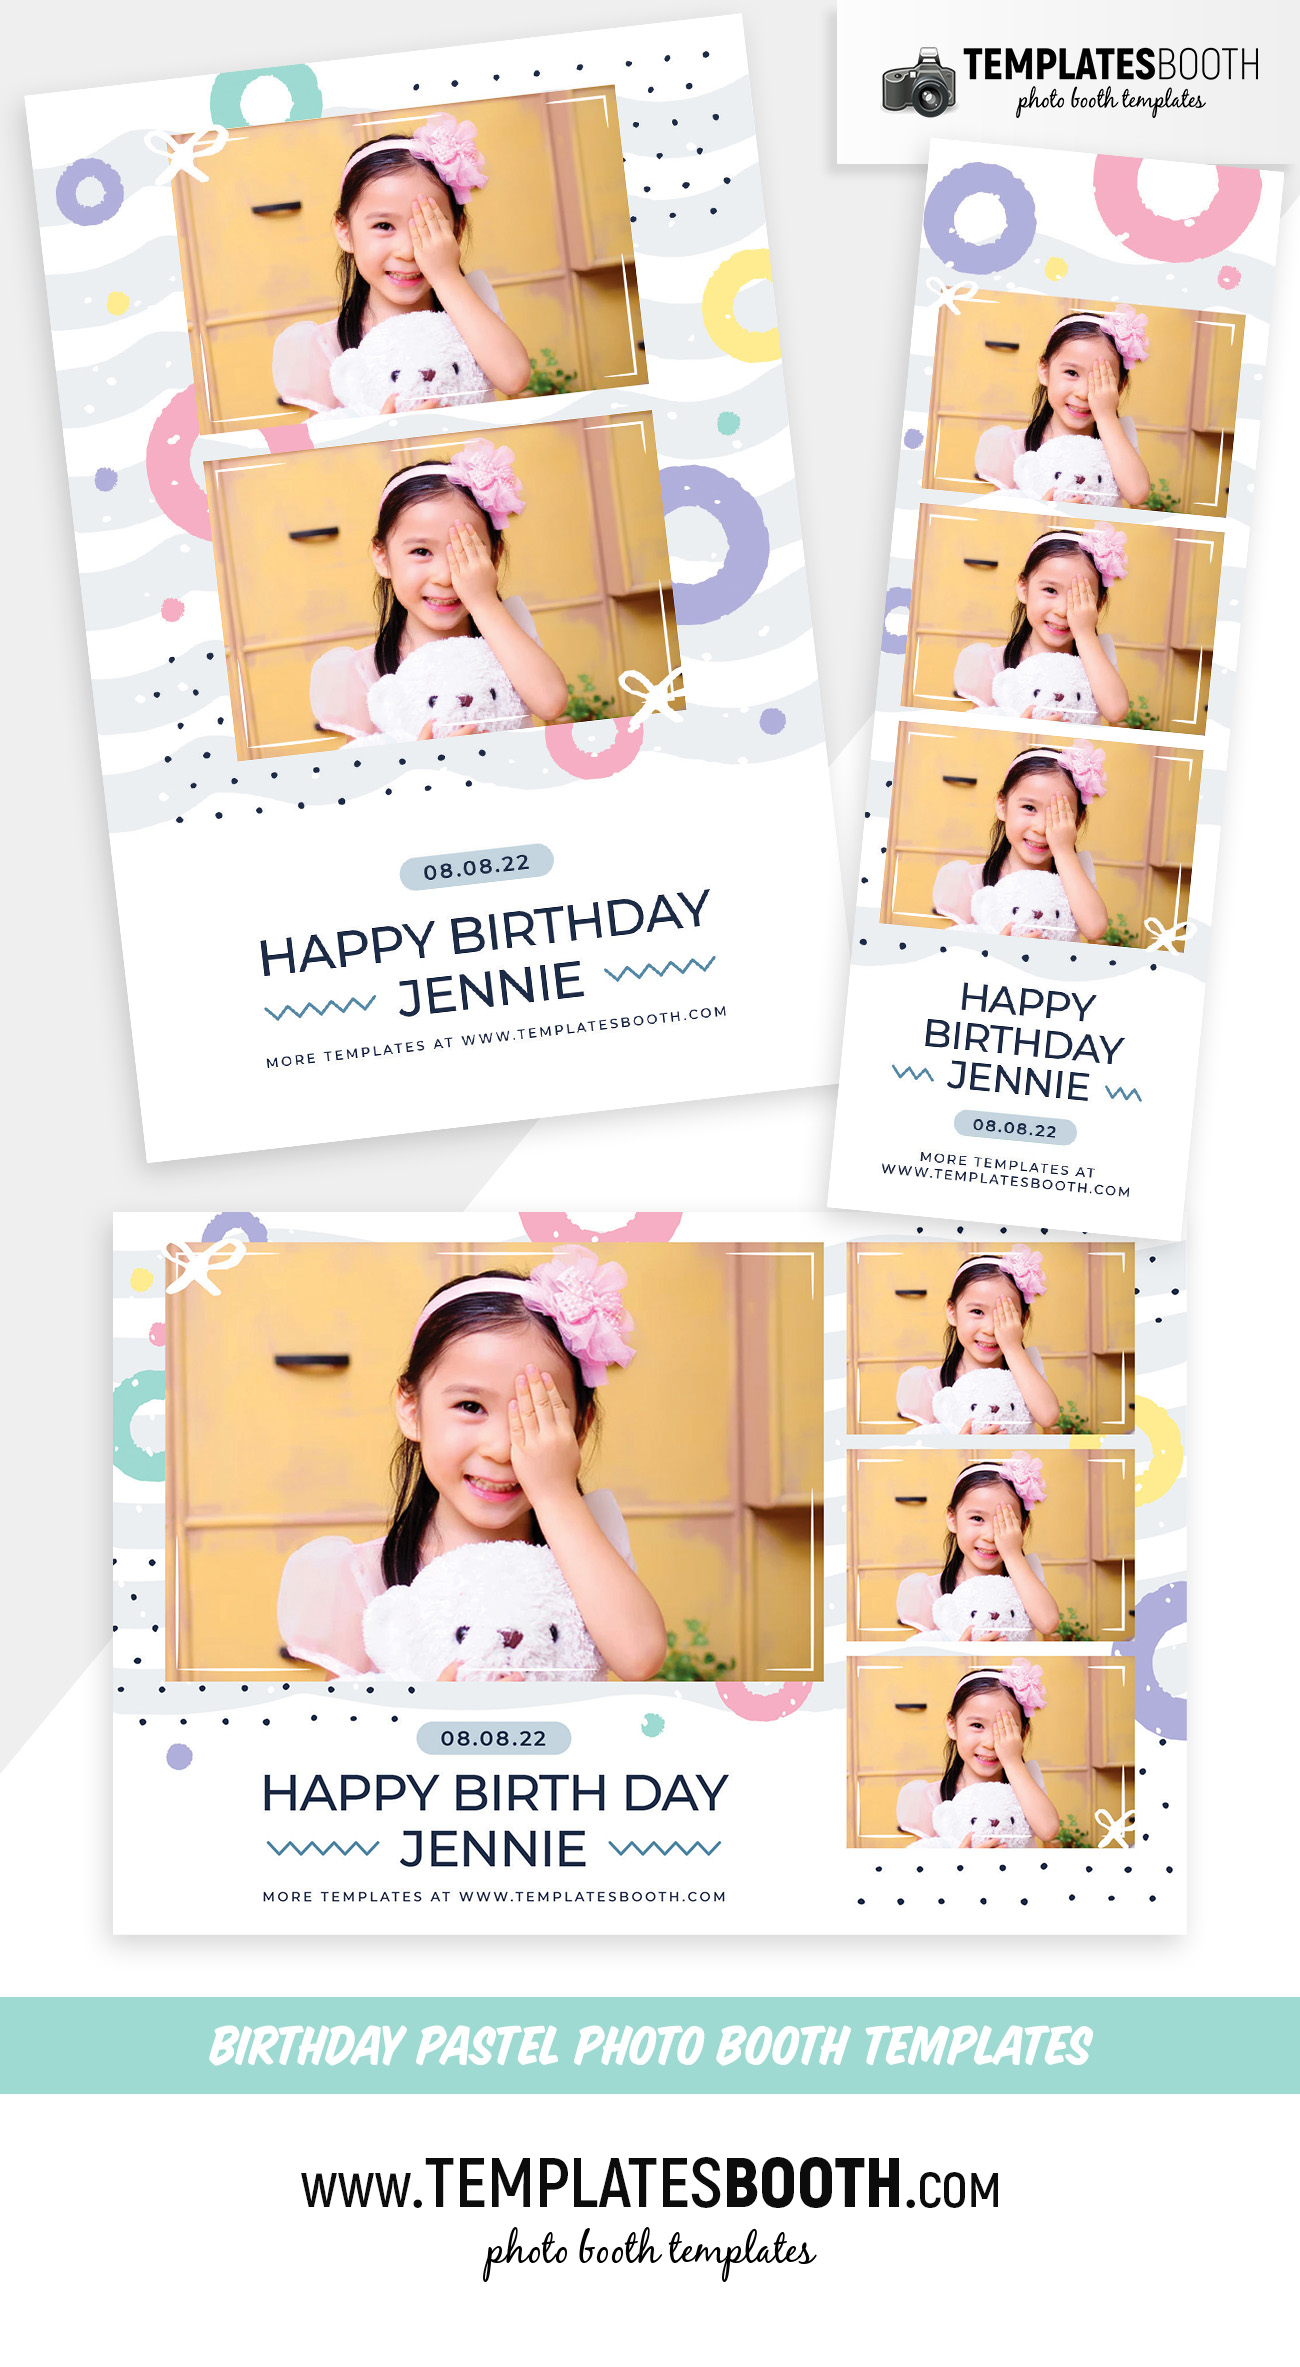 Birthday Pastel Photo Booth Template